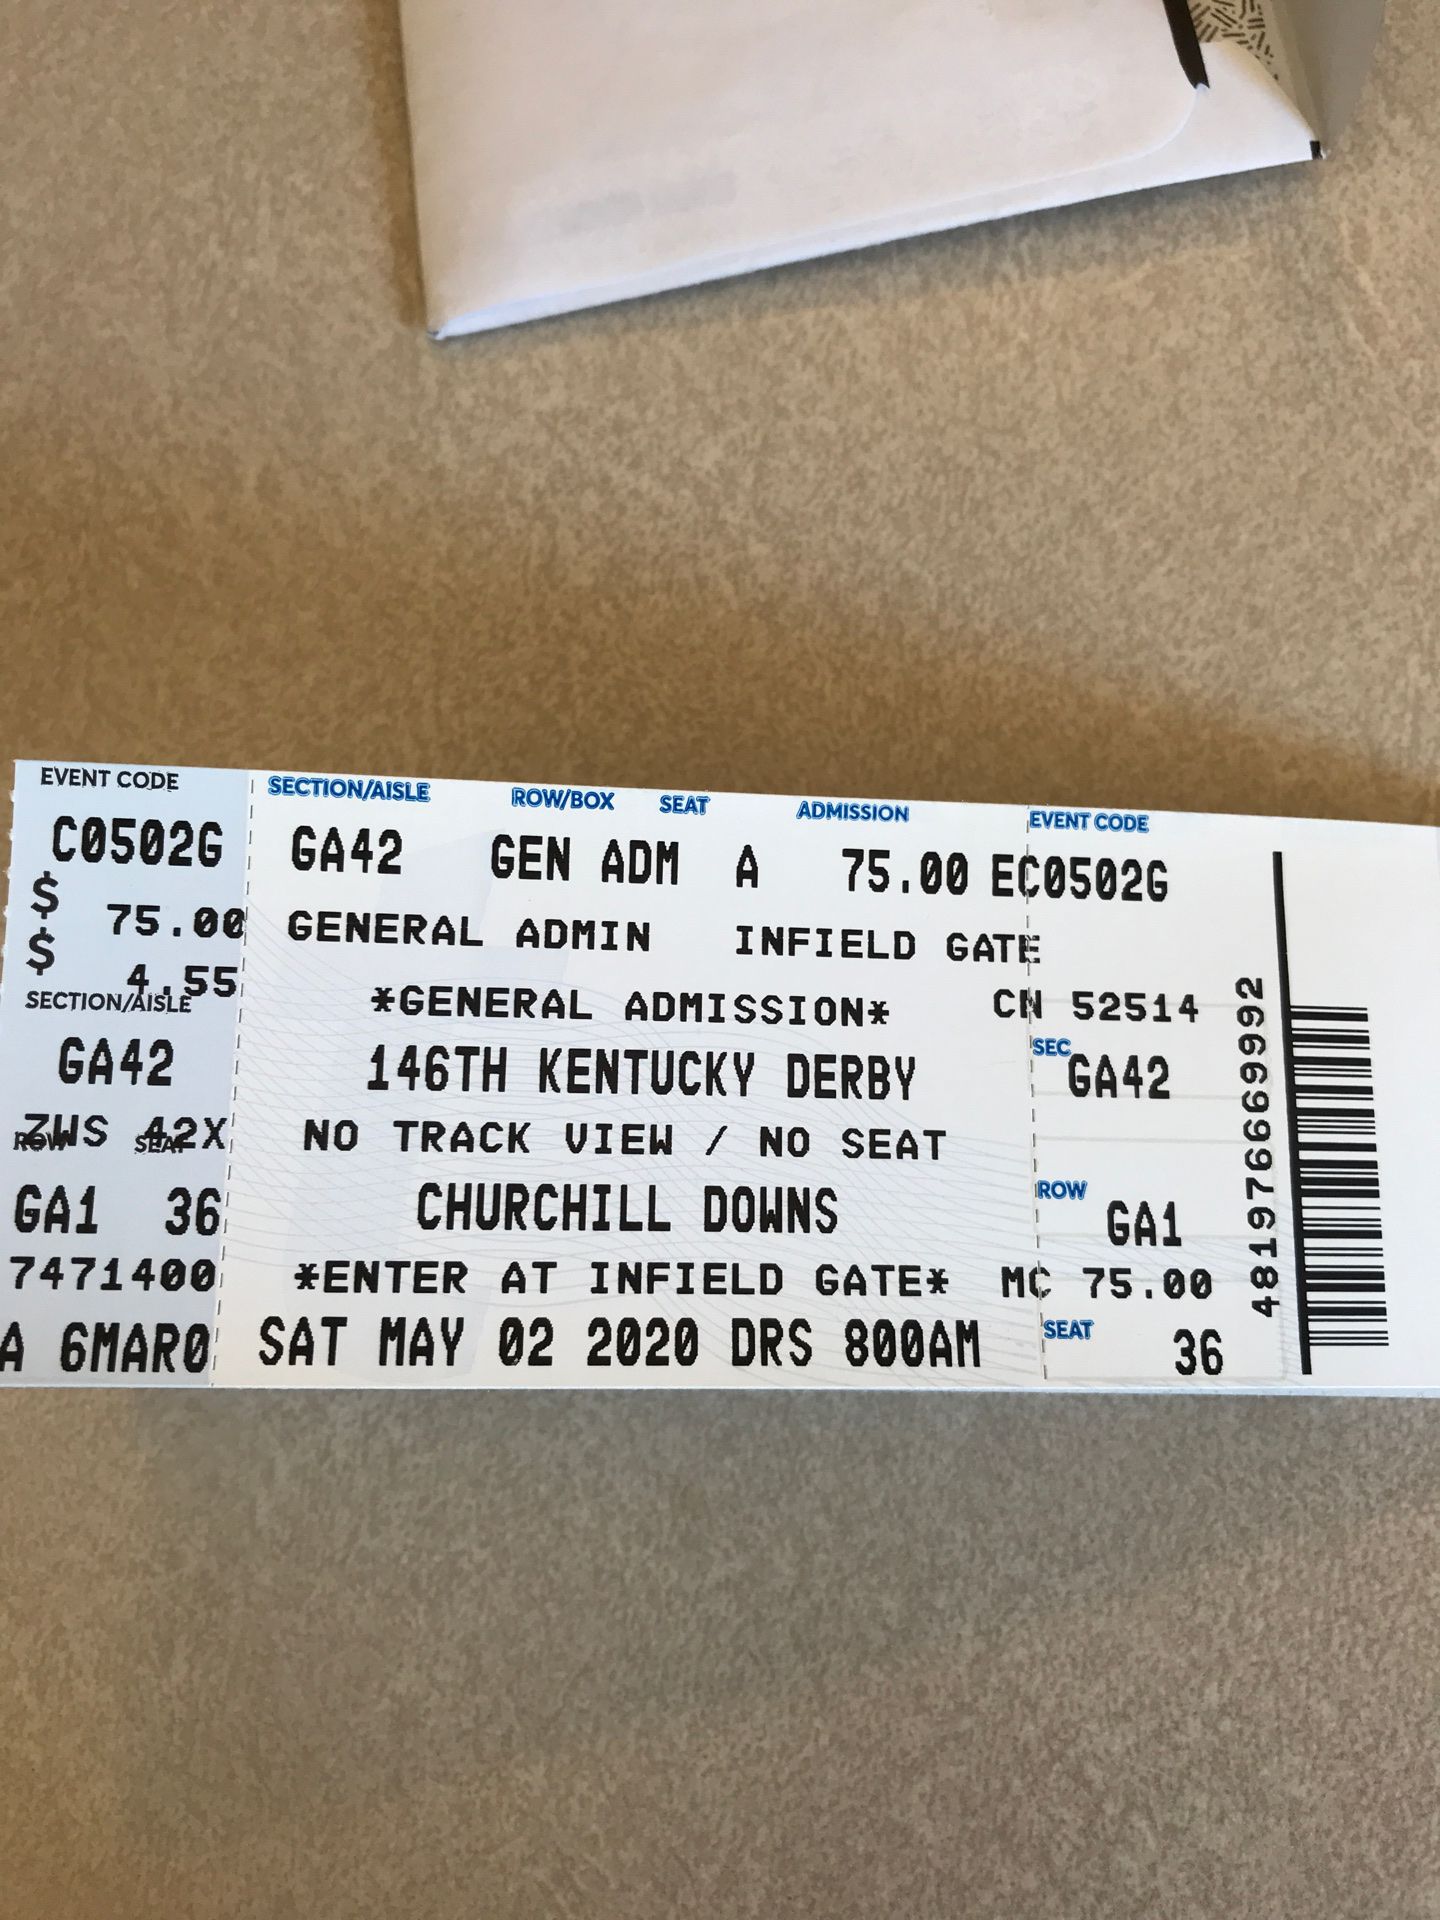 Kentucky derby tickets general admission 4 tickets for Saturday. Bought them for $75 each selling them for 50 each